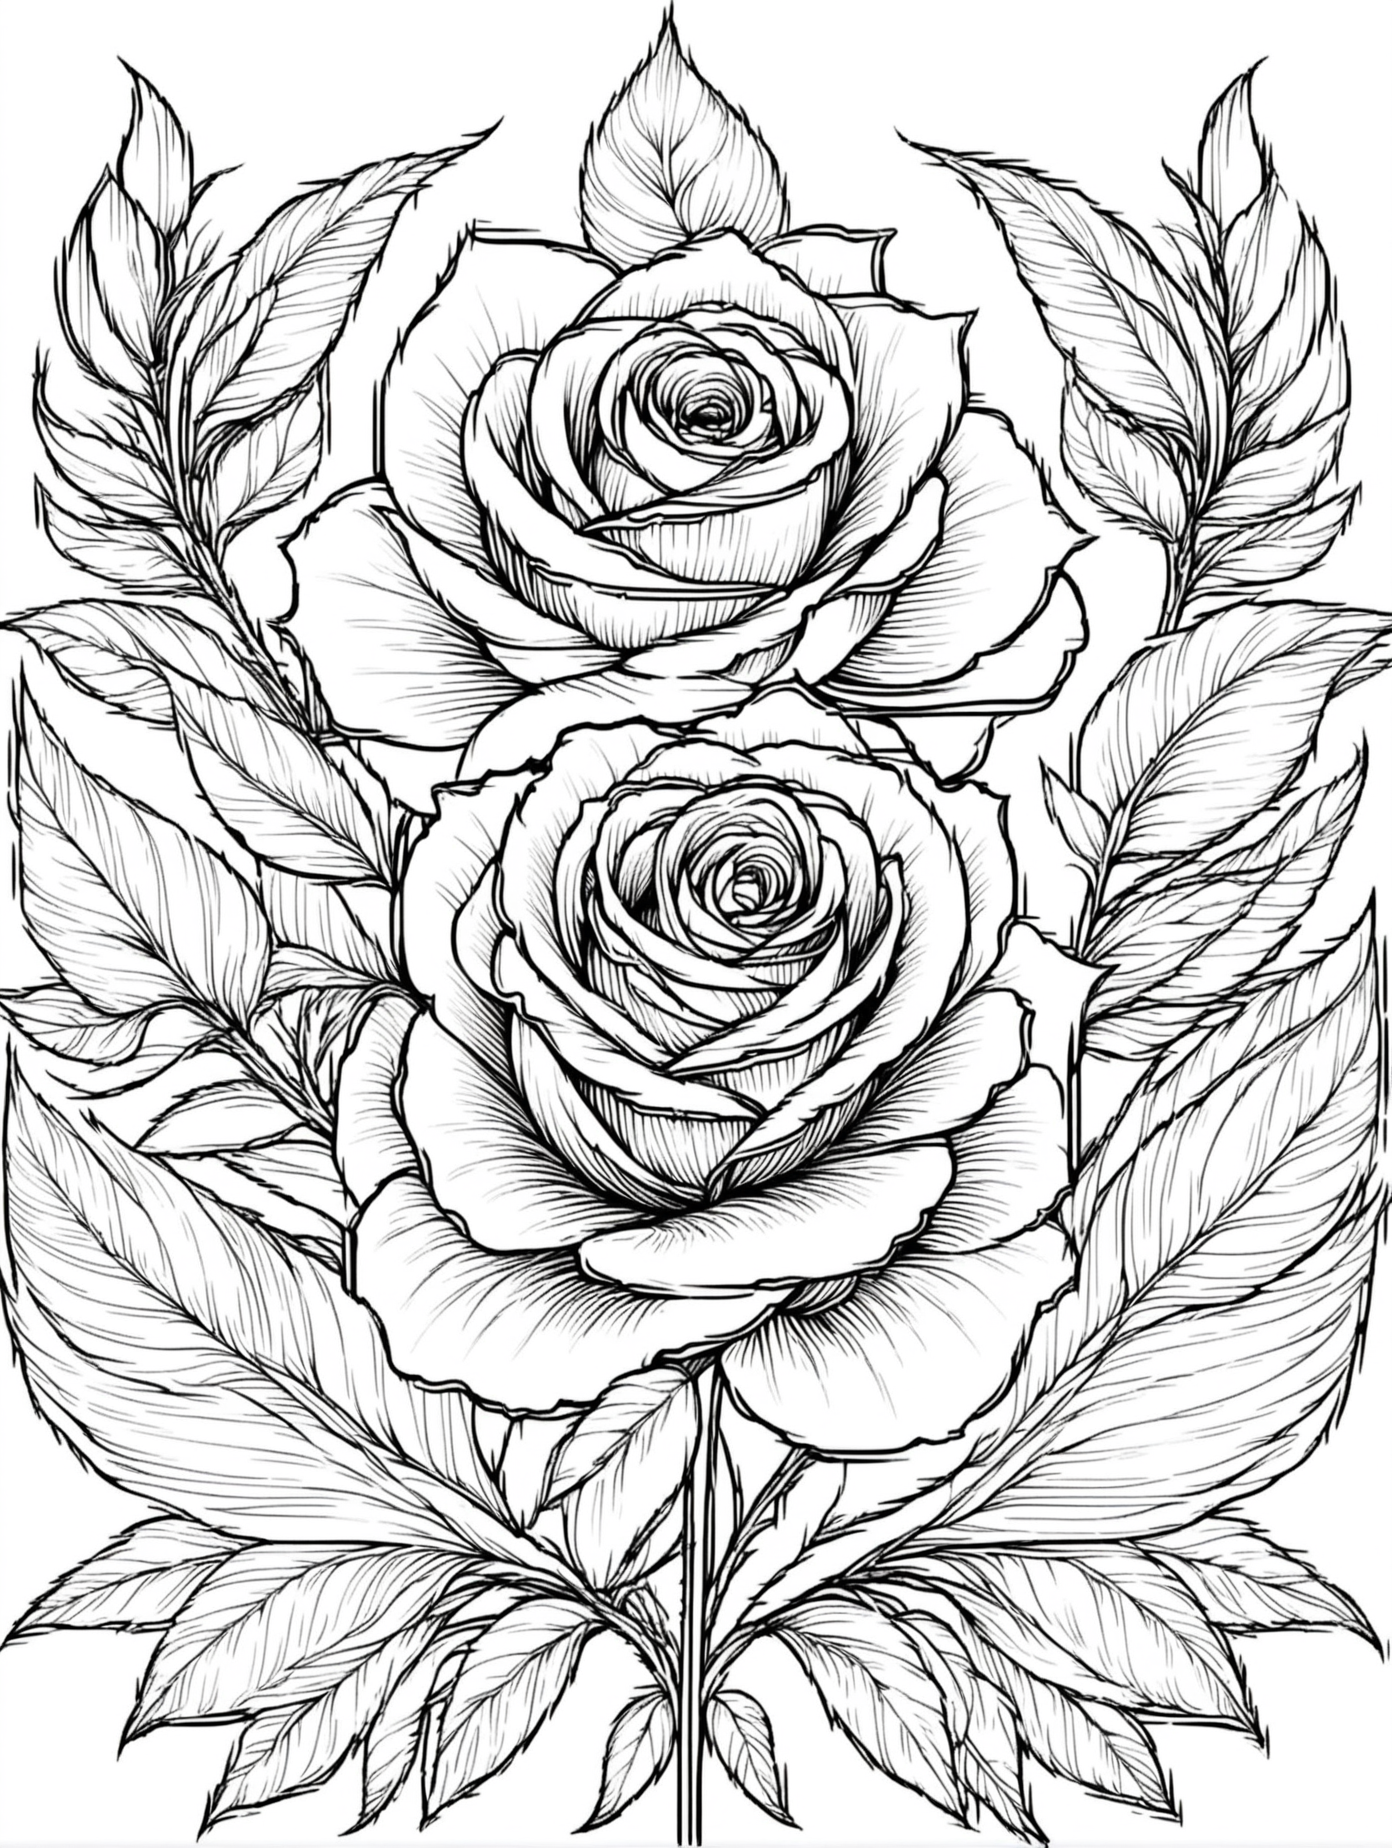 Beautiful black and white roses fantasy flowers composition for coloring page, thin lines, minimum details, no greys